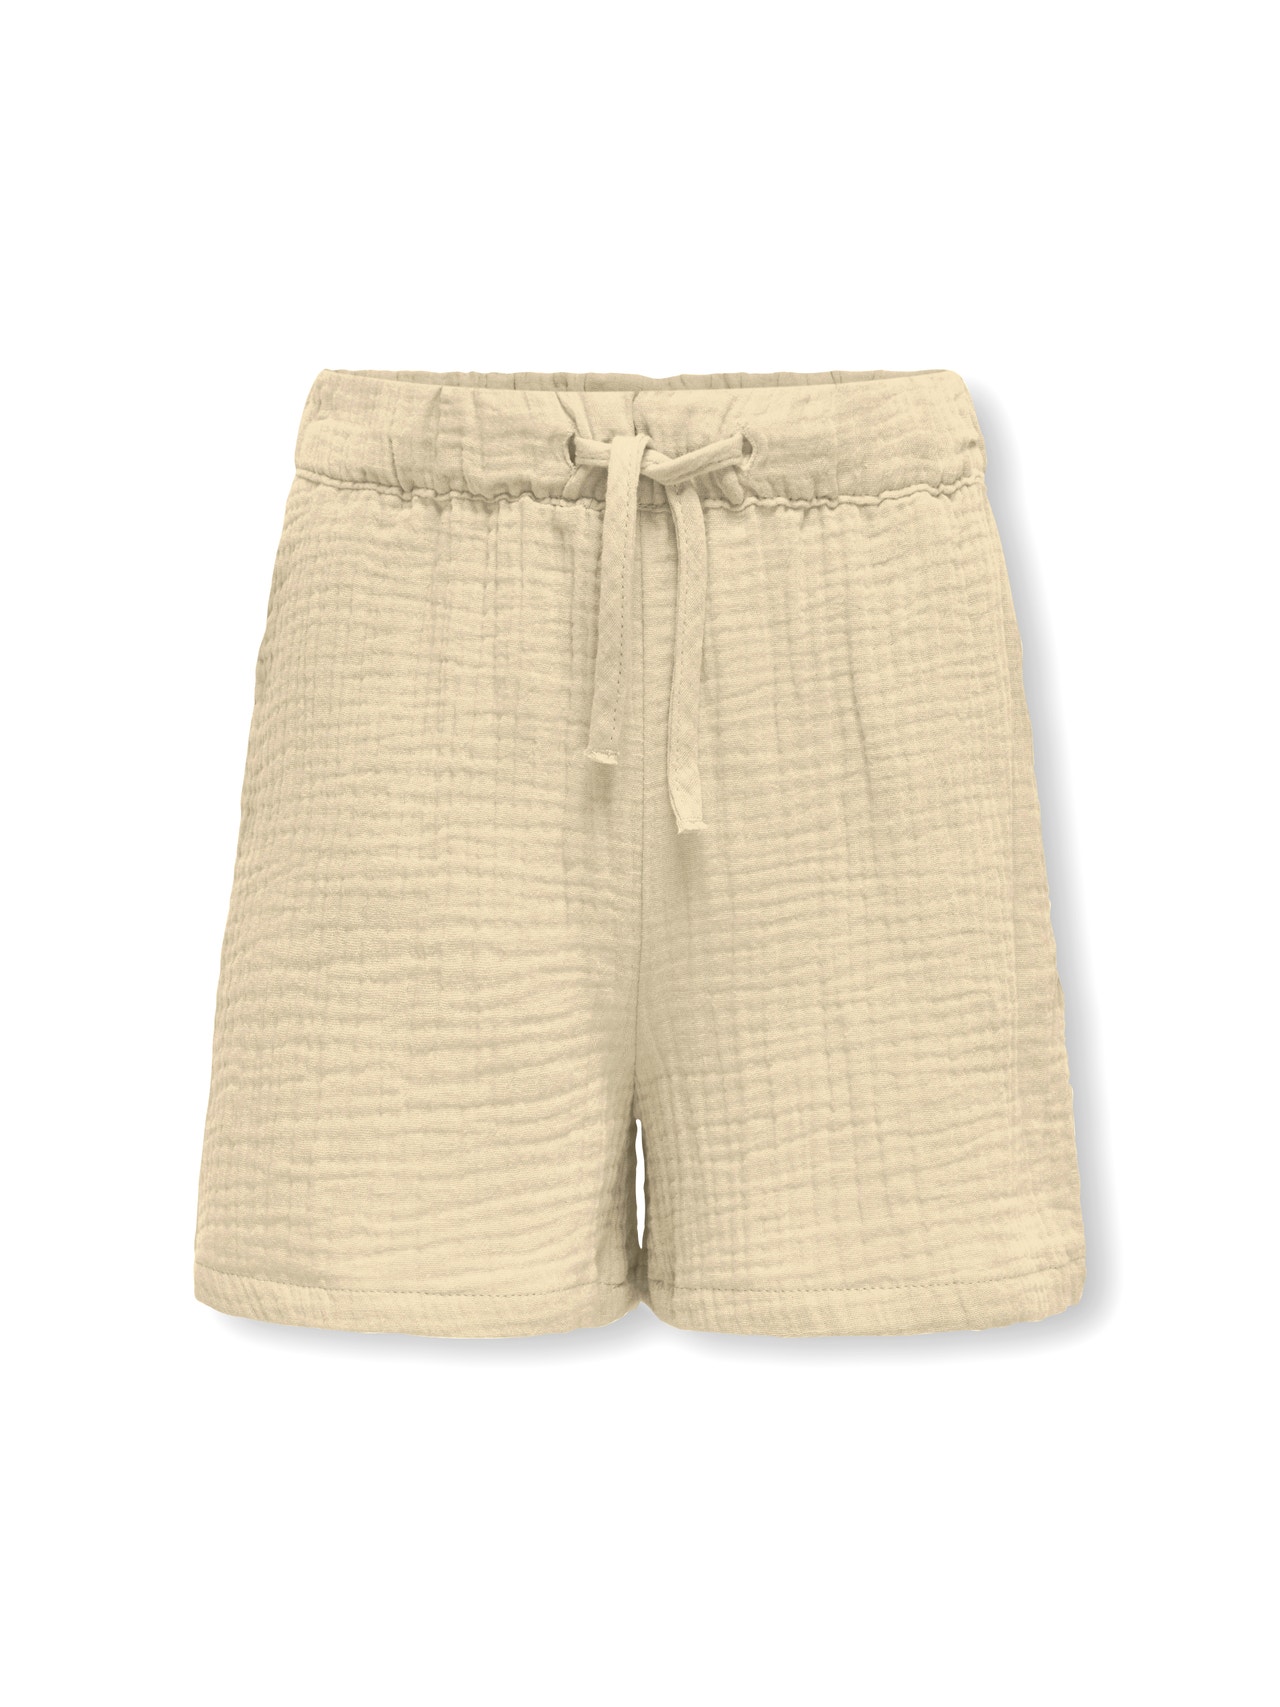 ONLY Shorts Regular Fit -Pumice Stone - 15293680